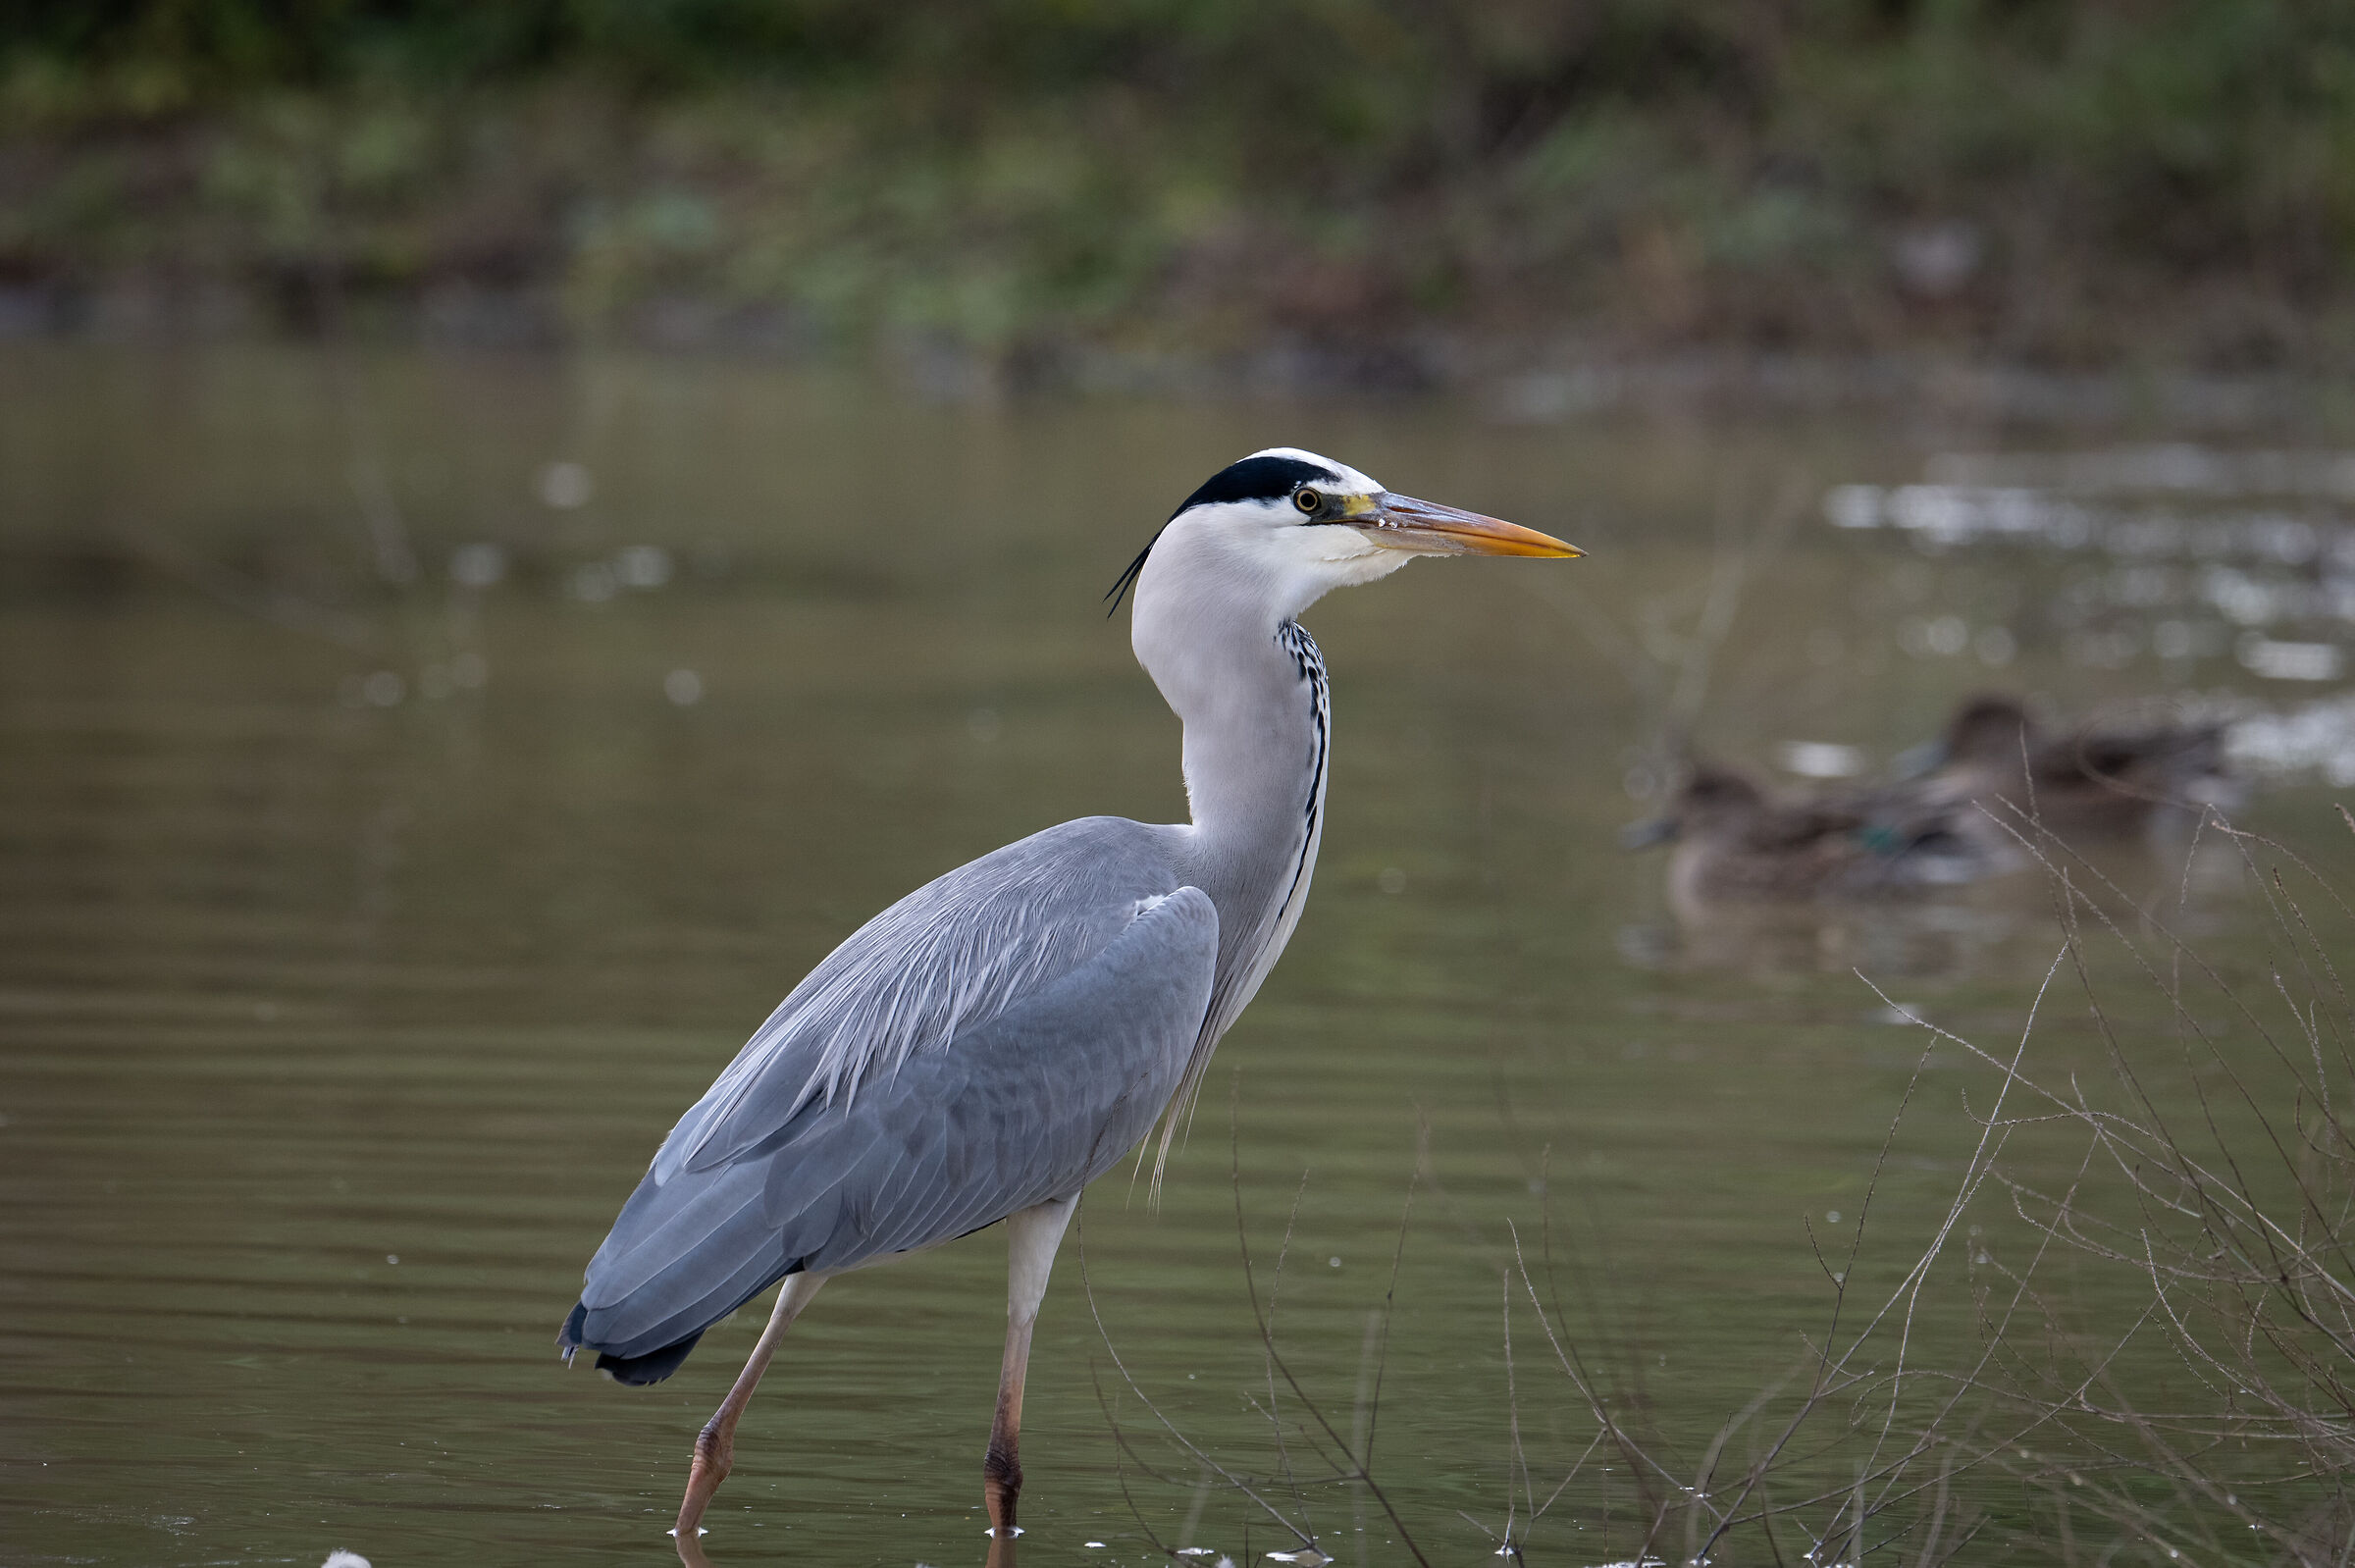 Grey heron and fish that you can't see...